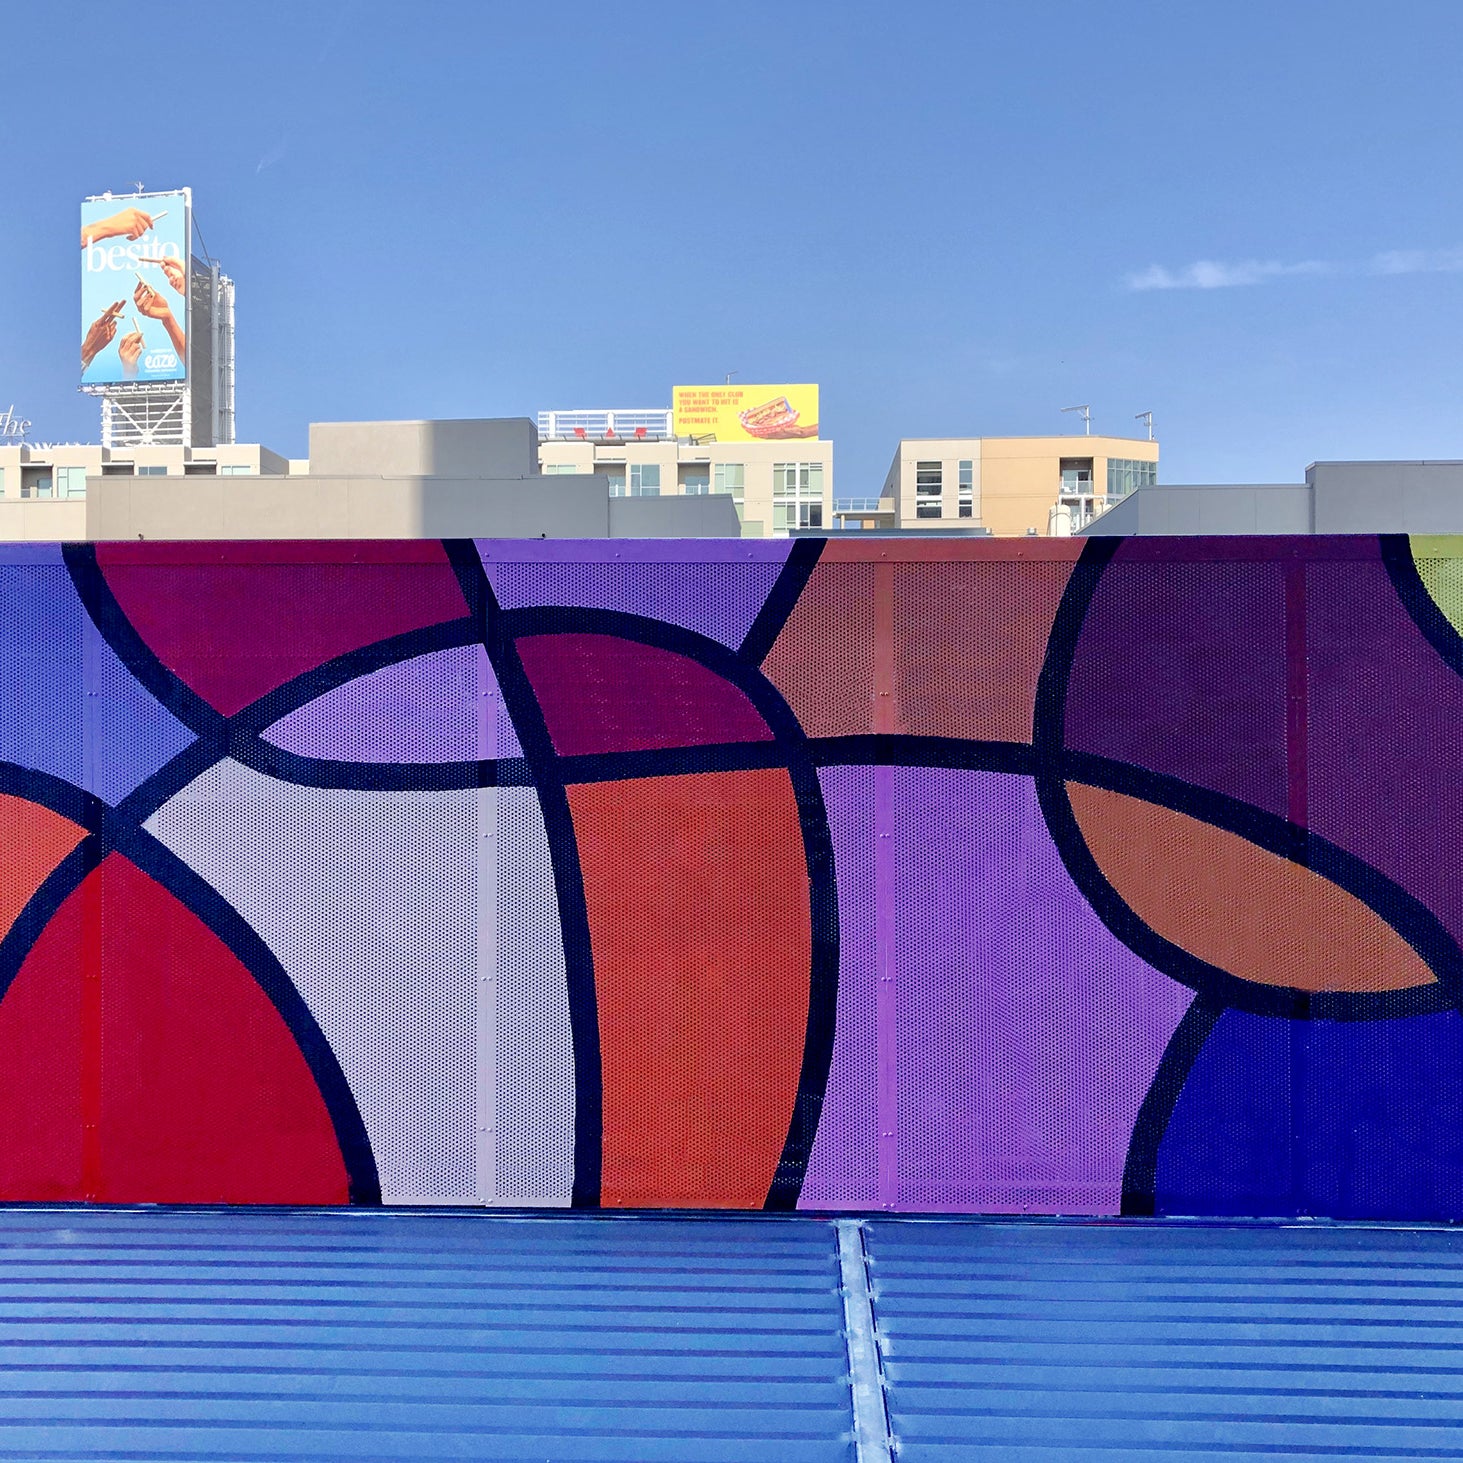 Colorful rooftop mural by WRAPPED Studio on perforated metal, displaying bold abstract patterns in red, purple, and yellow, visible from the surrounding office windows.